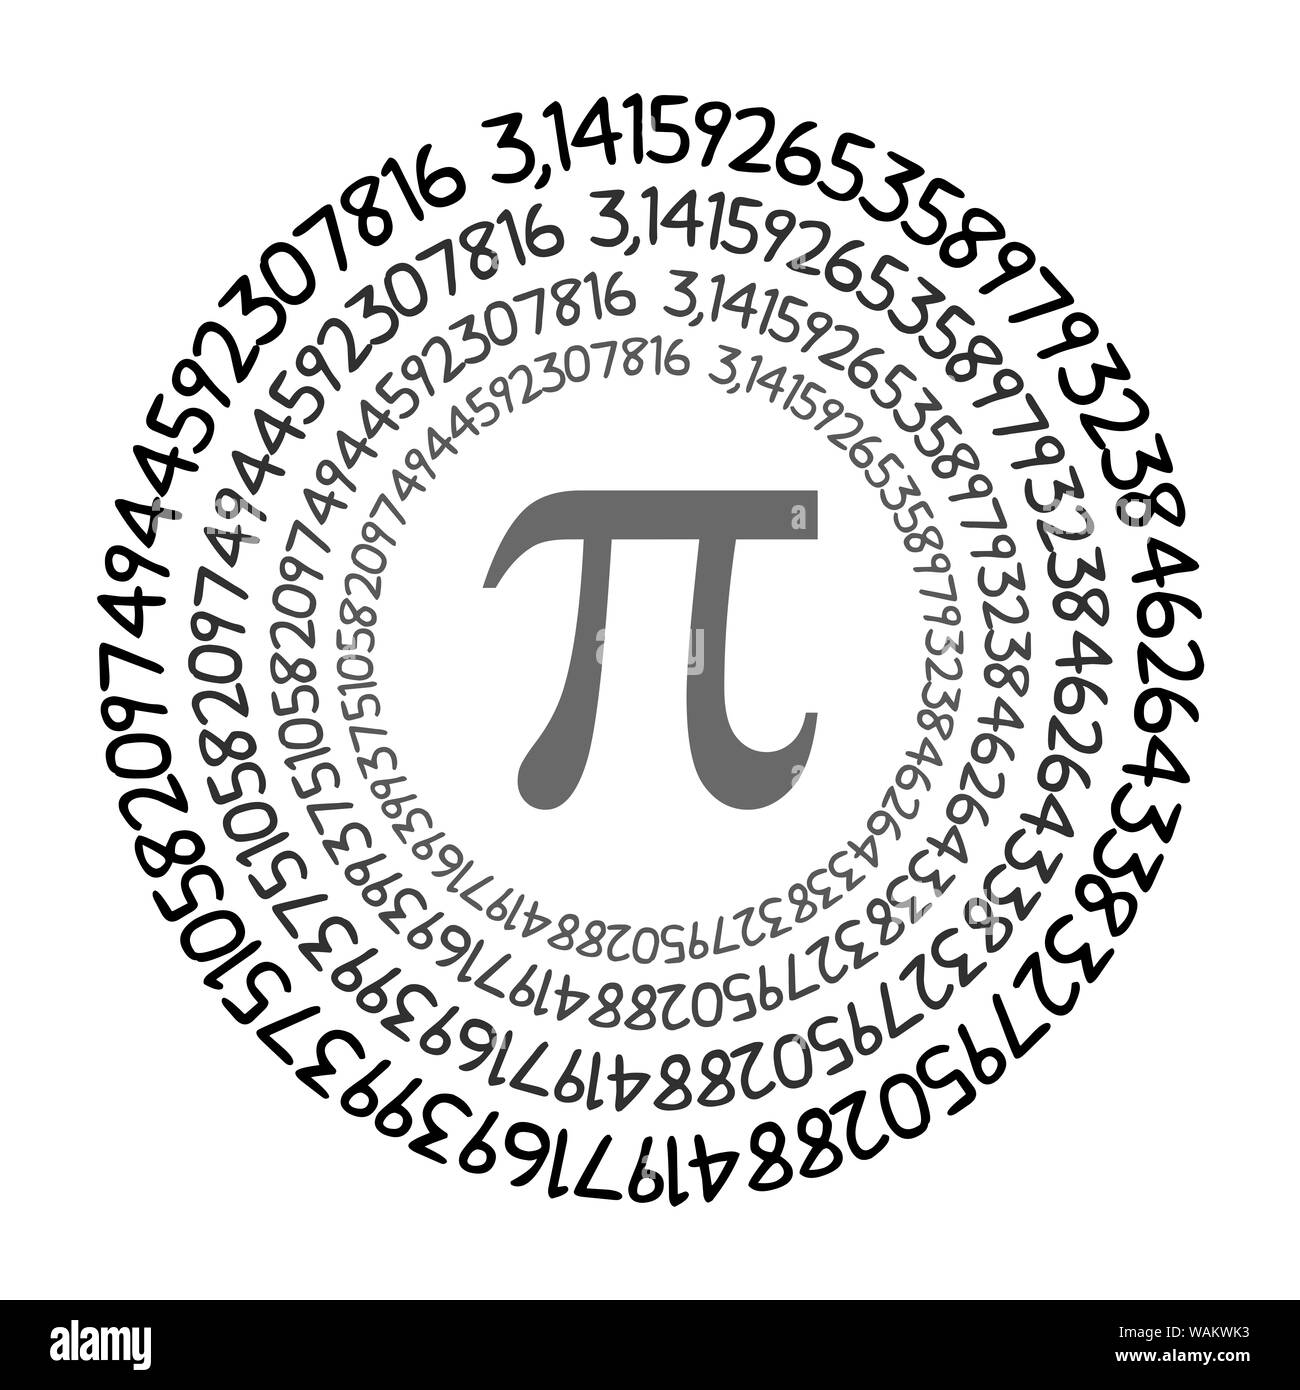 The Pi symbol mathematical constant irrational number on circle, greek letter, background Stock Photo